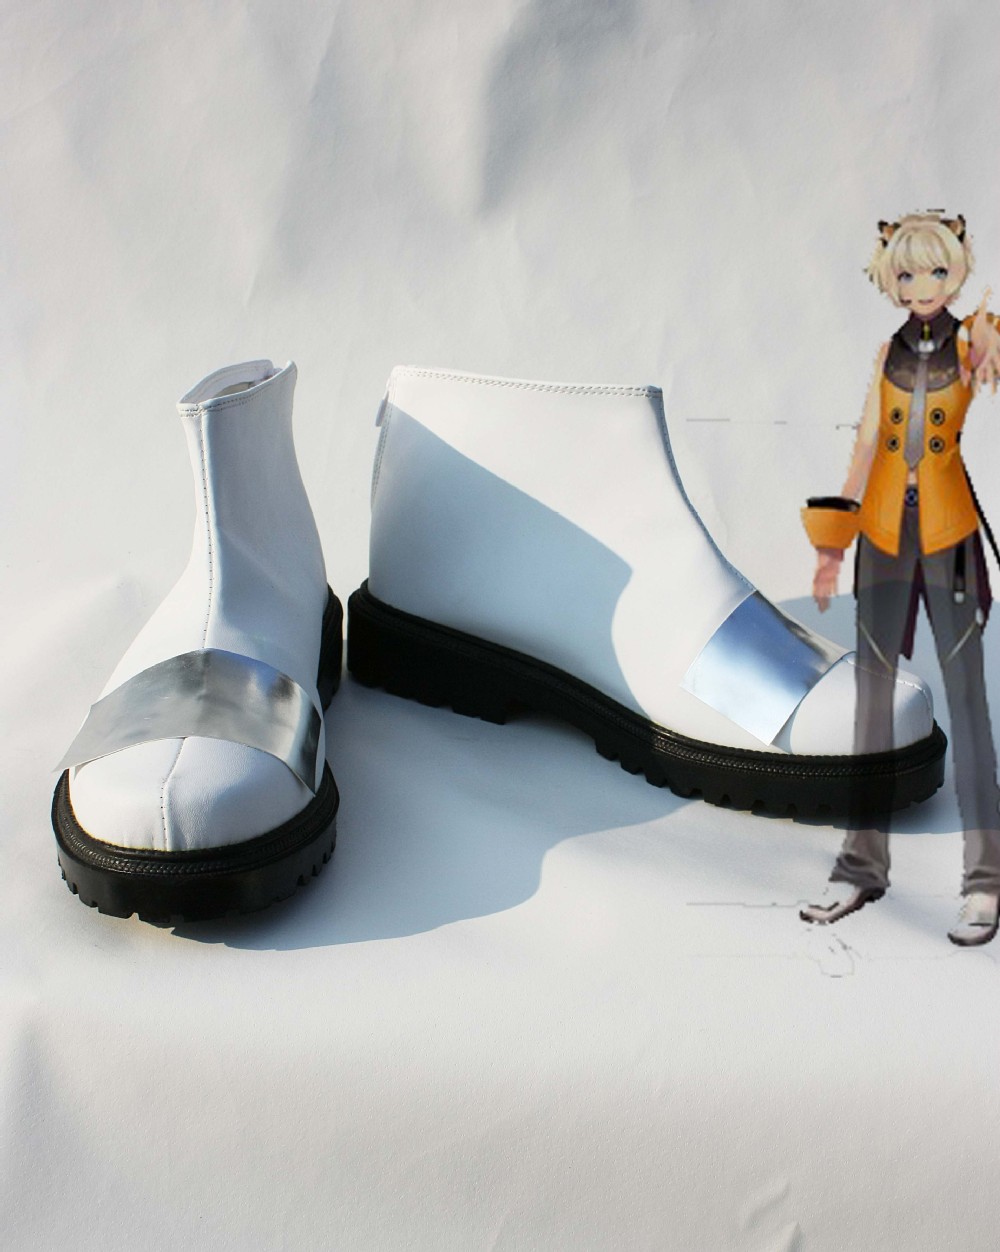 Costum made White Men Seeu Shoes from vocaloid 3 Cosplay